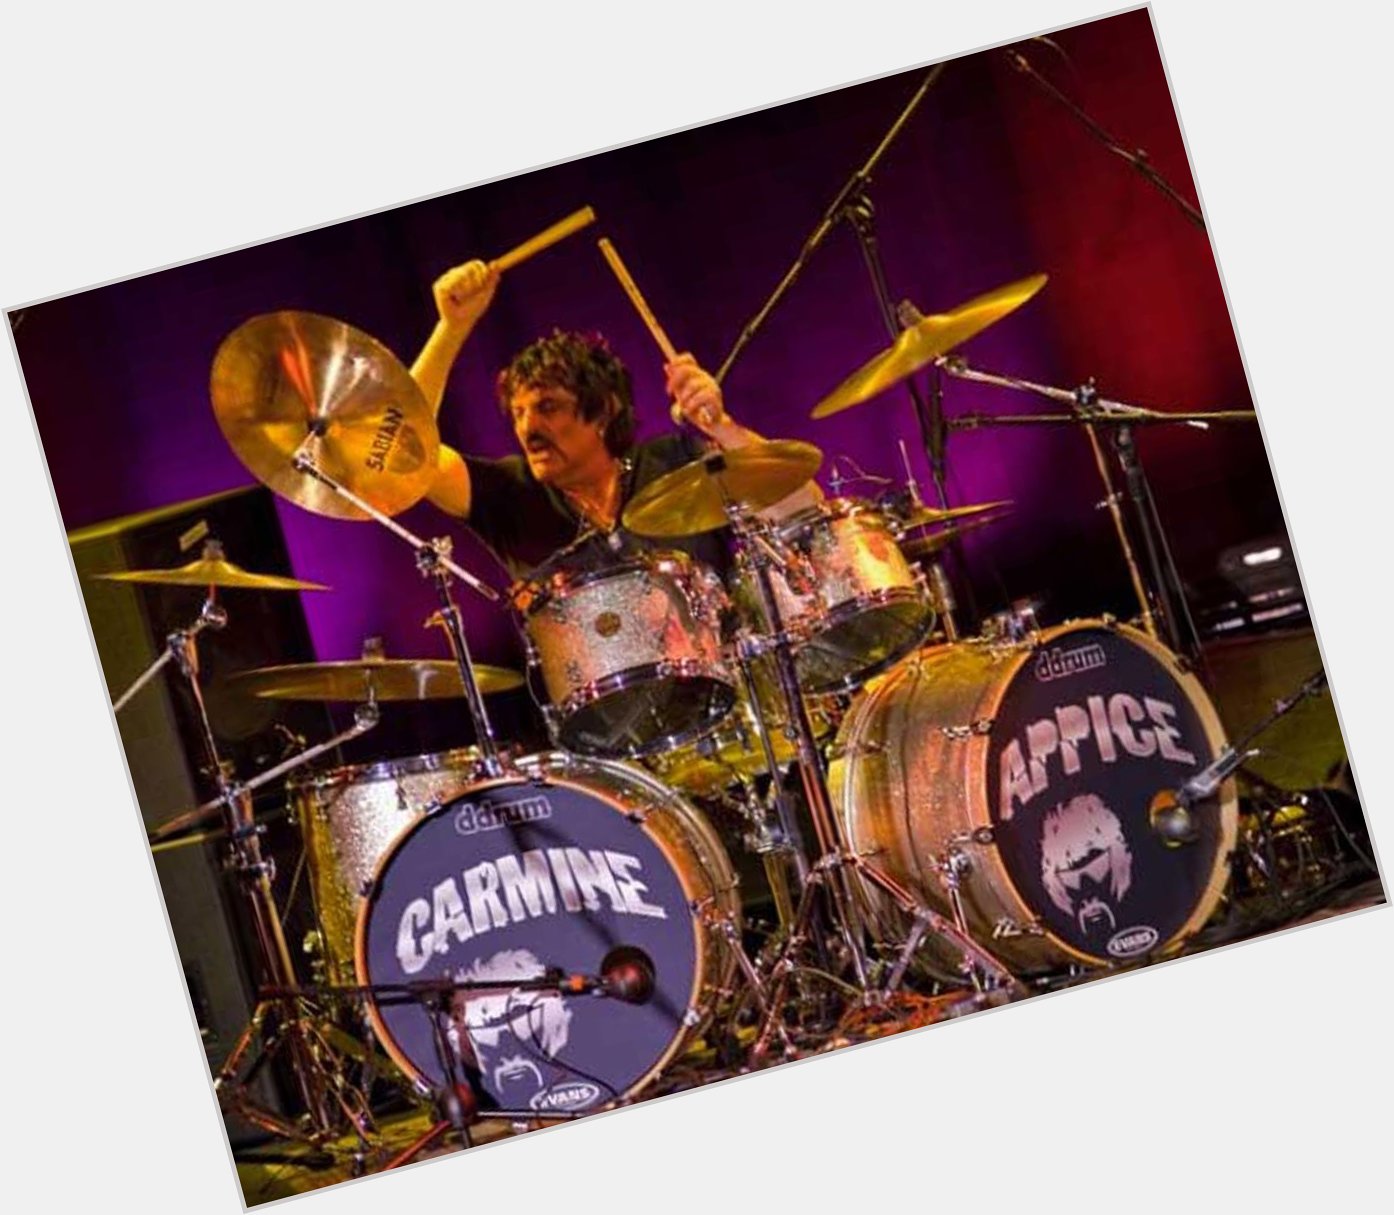 And a very happy birthday goes out to the great Carmine Appice!!! 